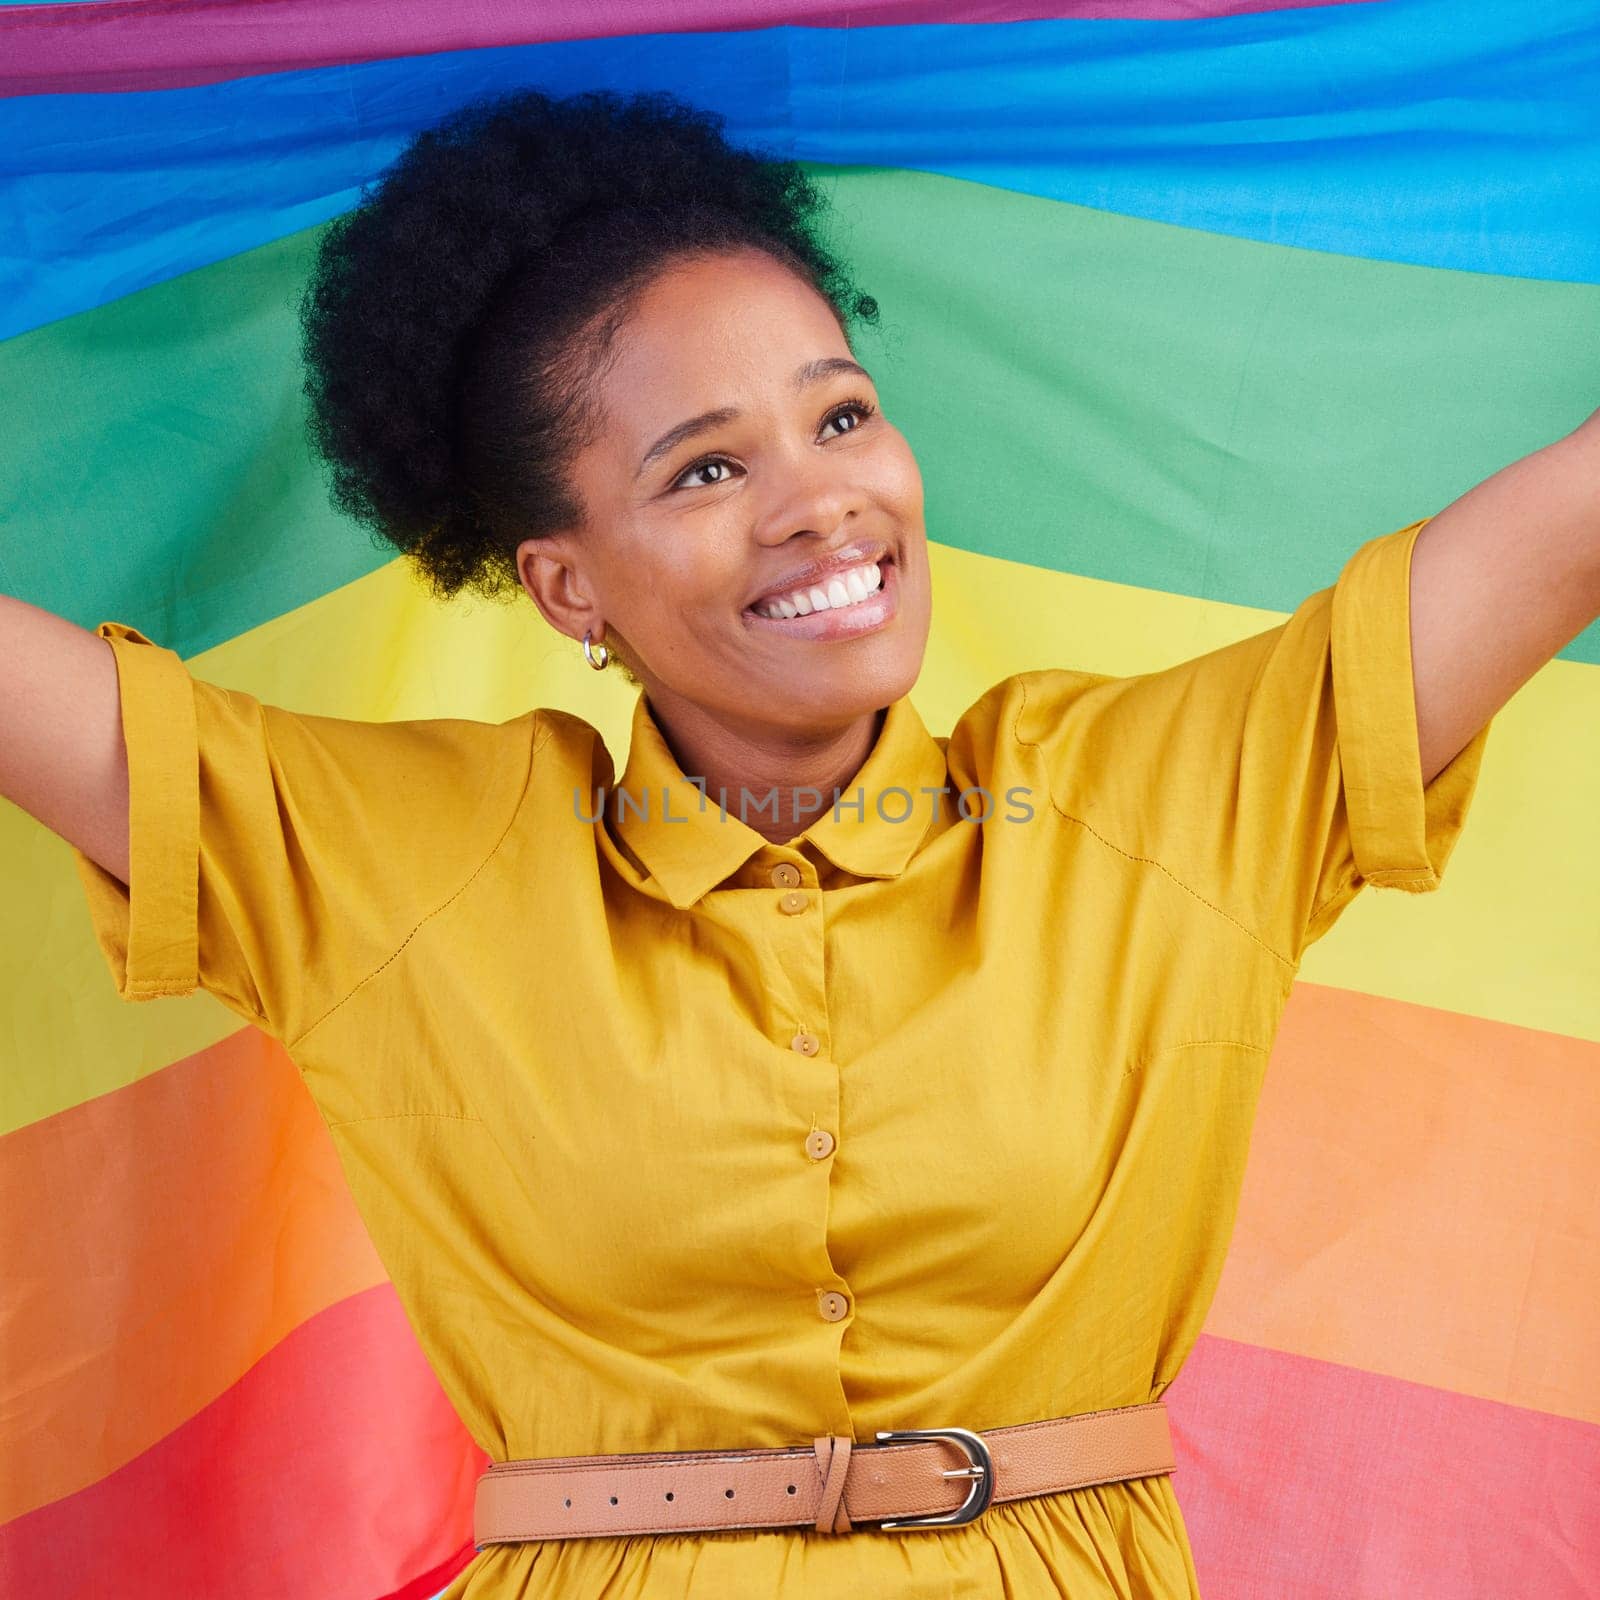 Gay, flag and happy black woman in studio for pride, rights and lgbtq lifestyle choice. Rainbow, freedom and face of lesbian African female smile, free and confident with queer sexuality or identity.